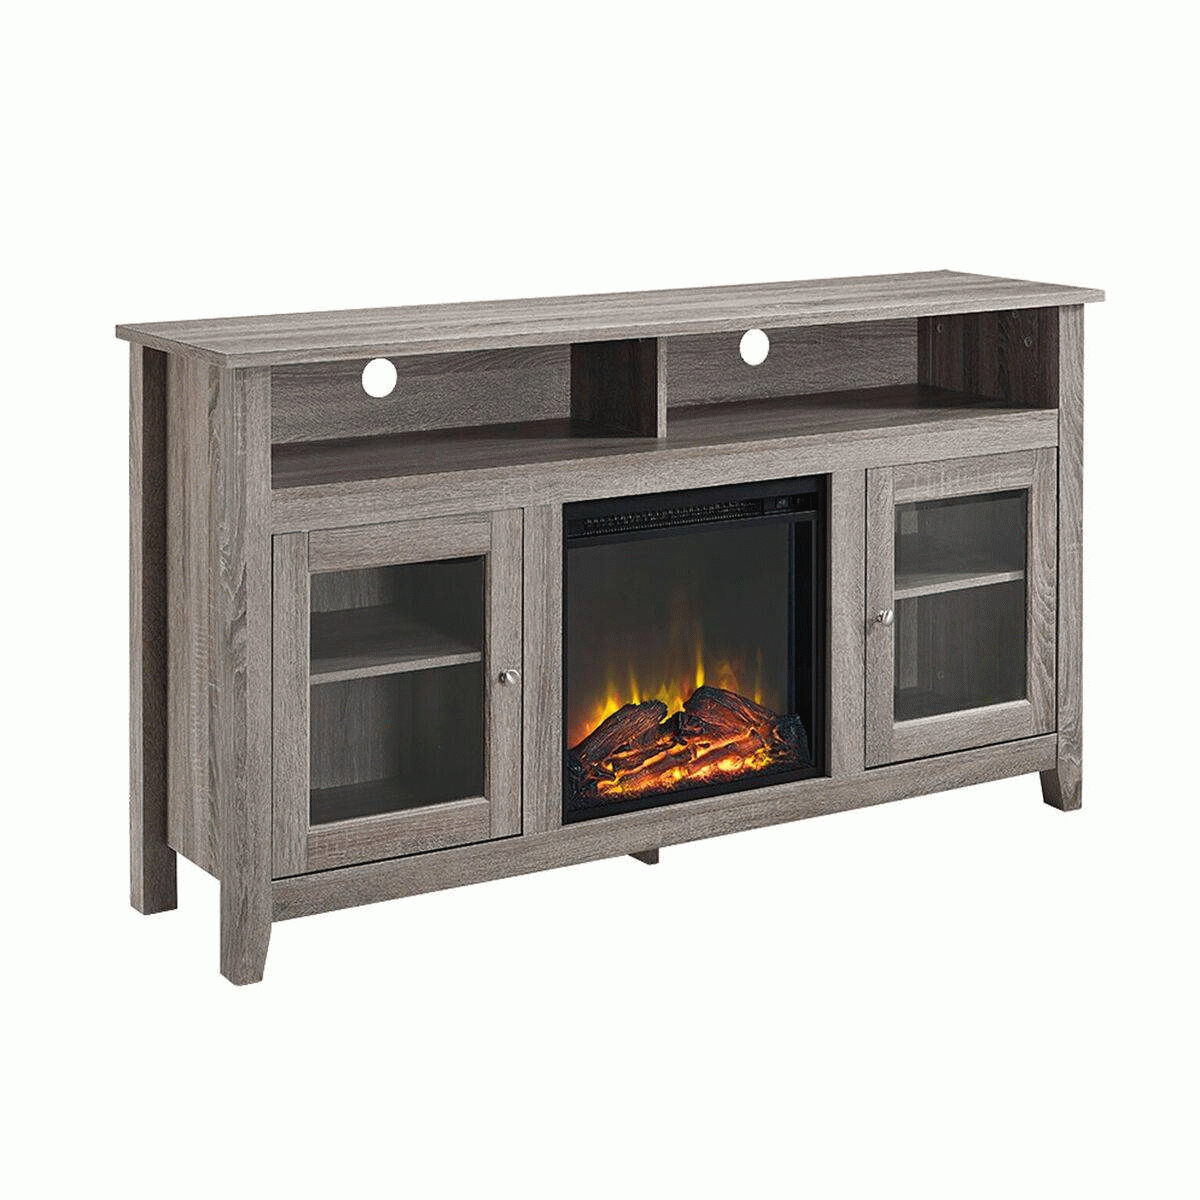 58" Wood Highboy Fireplace Tv Stand – Driftwood – Walker Edison W58fp18hbag Throughout Wood Highboy Fireplace Tv Stands (Photo 4 of 15)